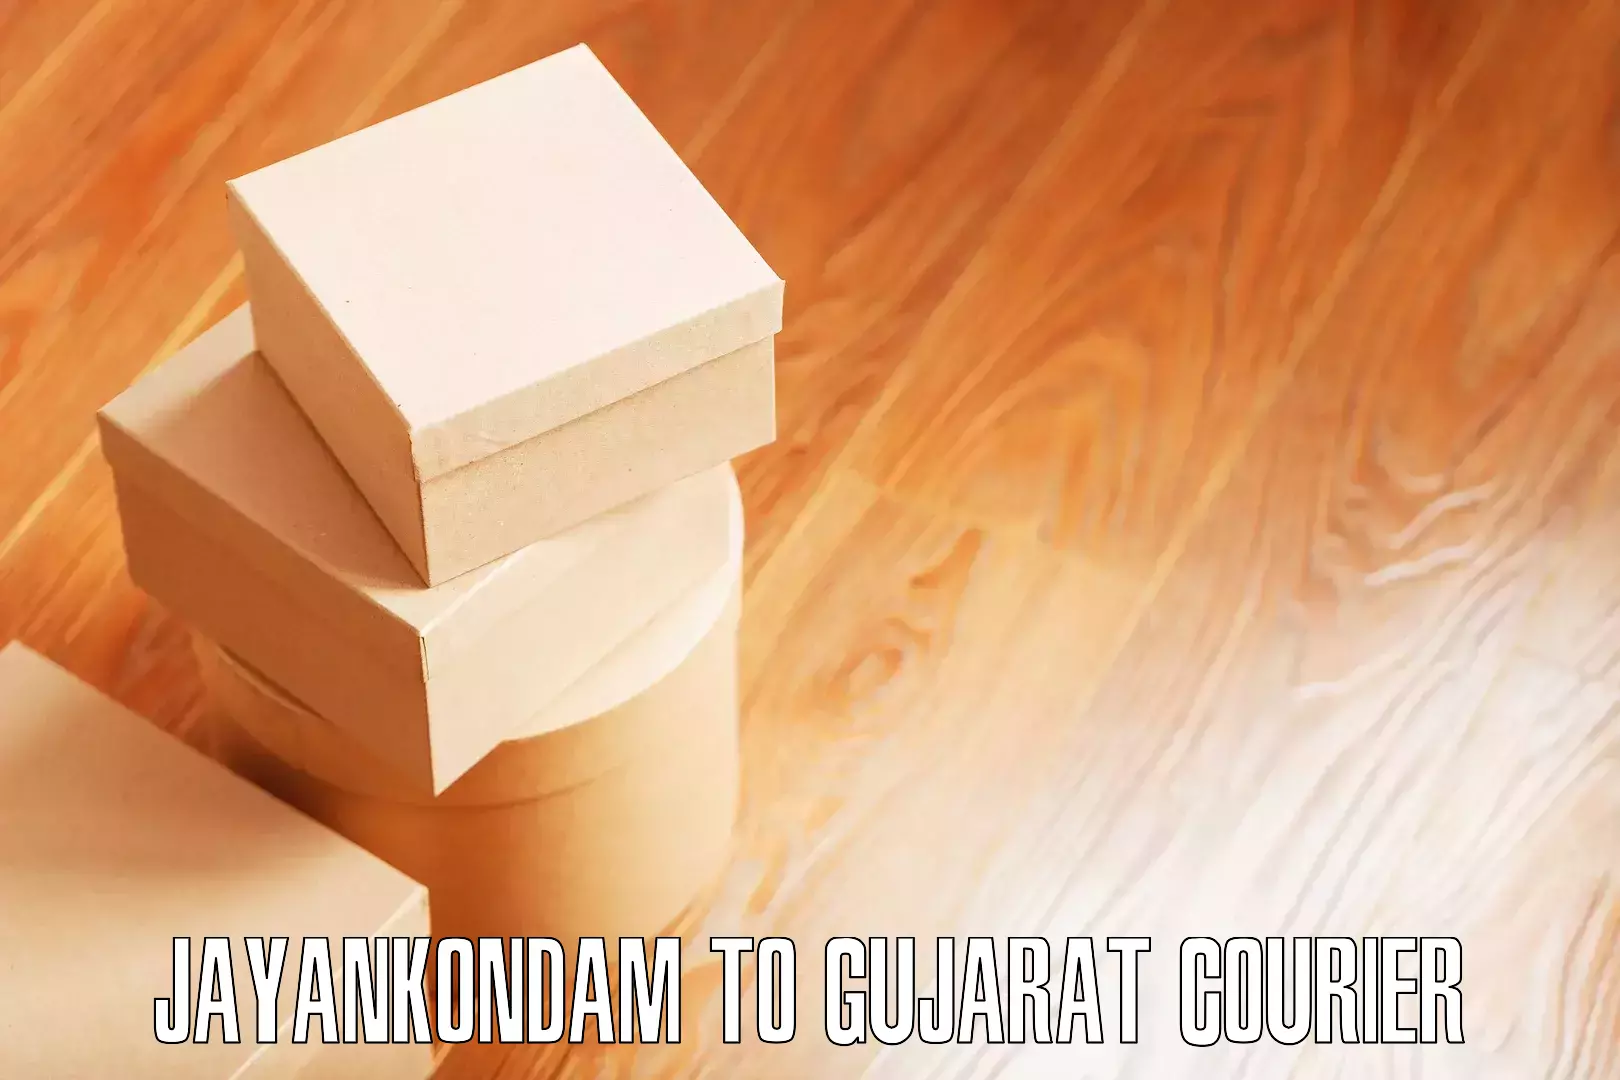 Quality relocation assistance in Jayankondam to Gujarat